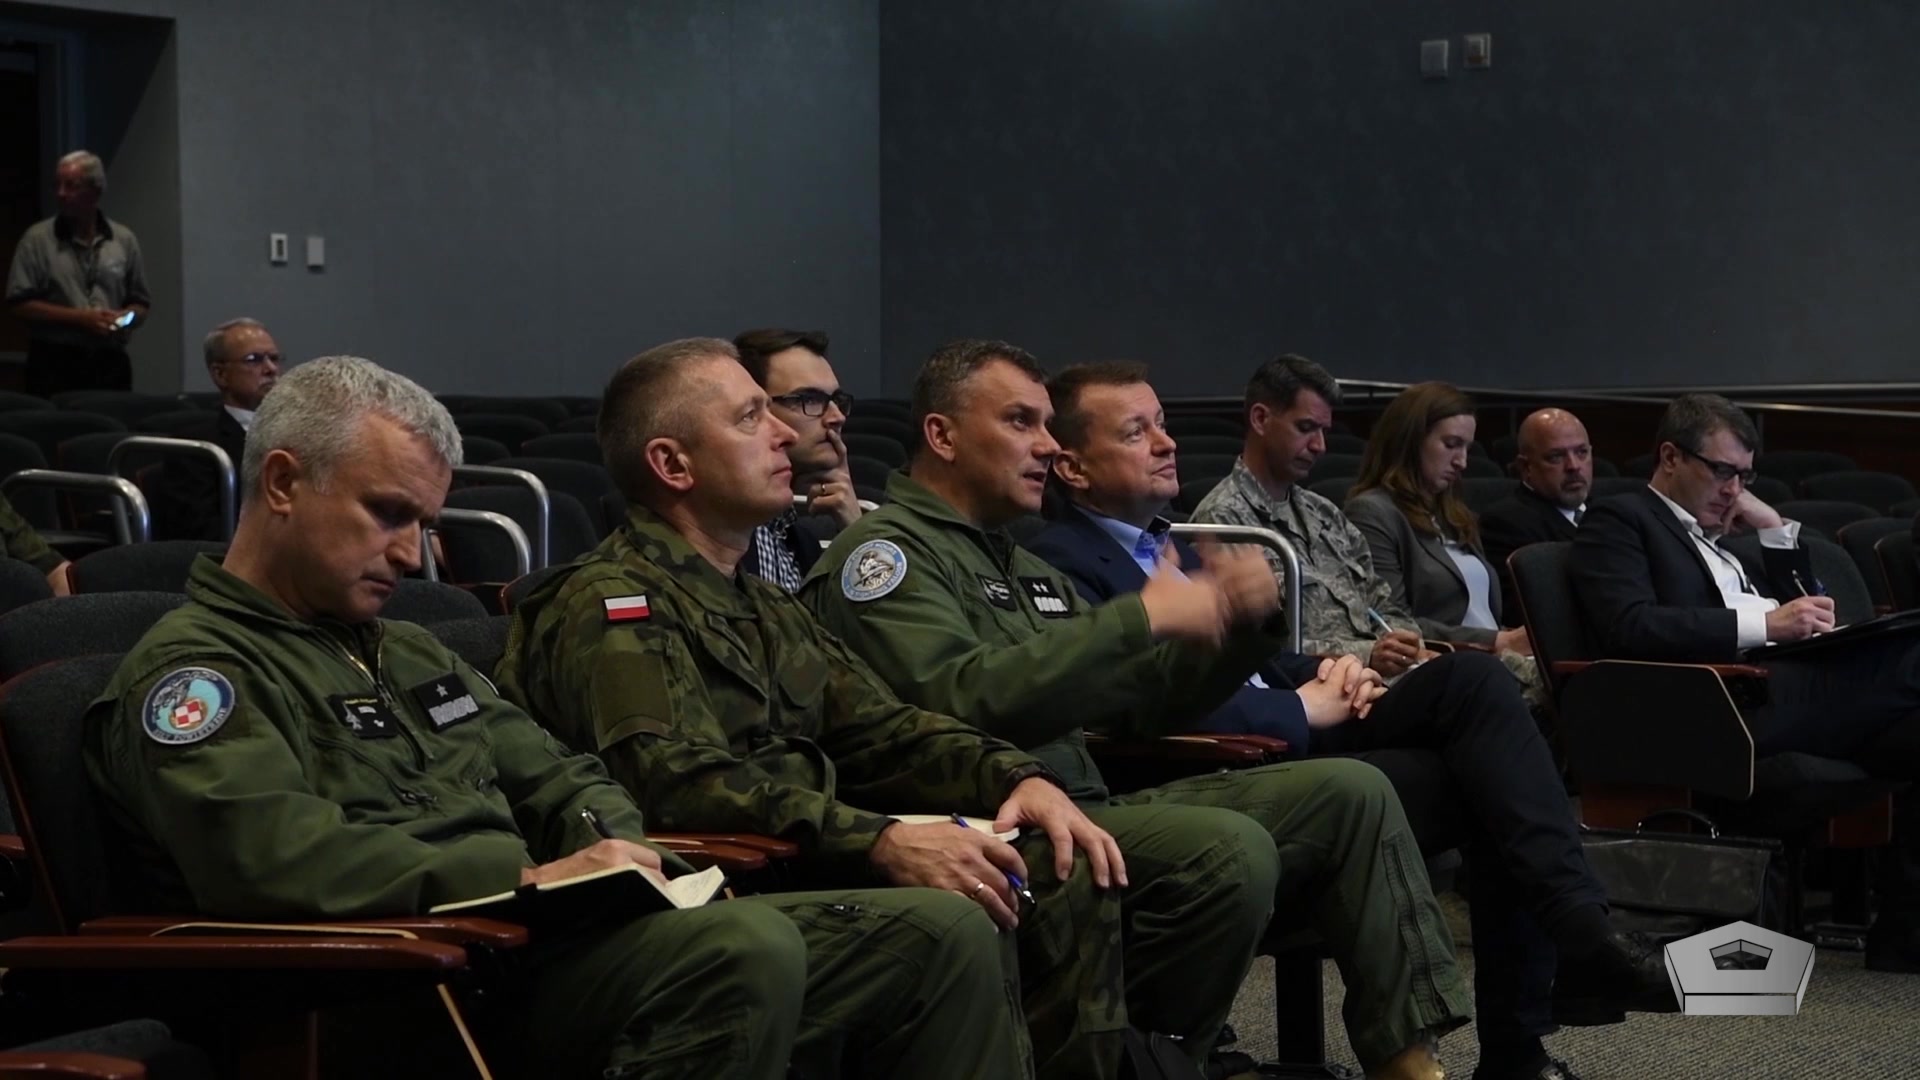 Polish Defense Minister Mariusz Blaszczak visited Eglin Air Force Base, Fla., June 10, 2019, to get acquainted with the F-35 Lightning II joint strike fighter aircraft. Blaszczak said Poland’s air force hopes to be operating the aircraft by 2026.